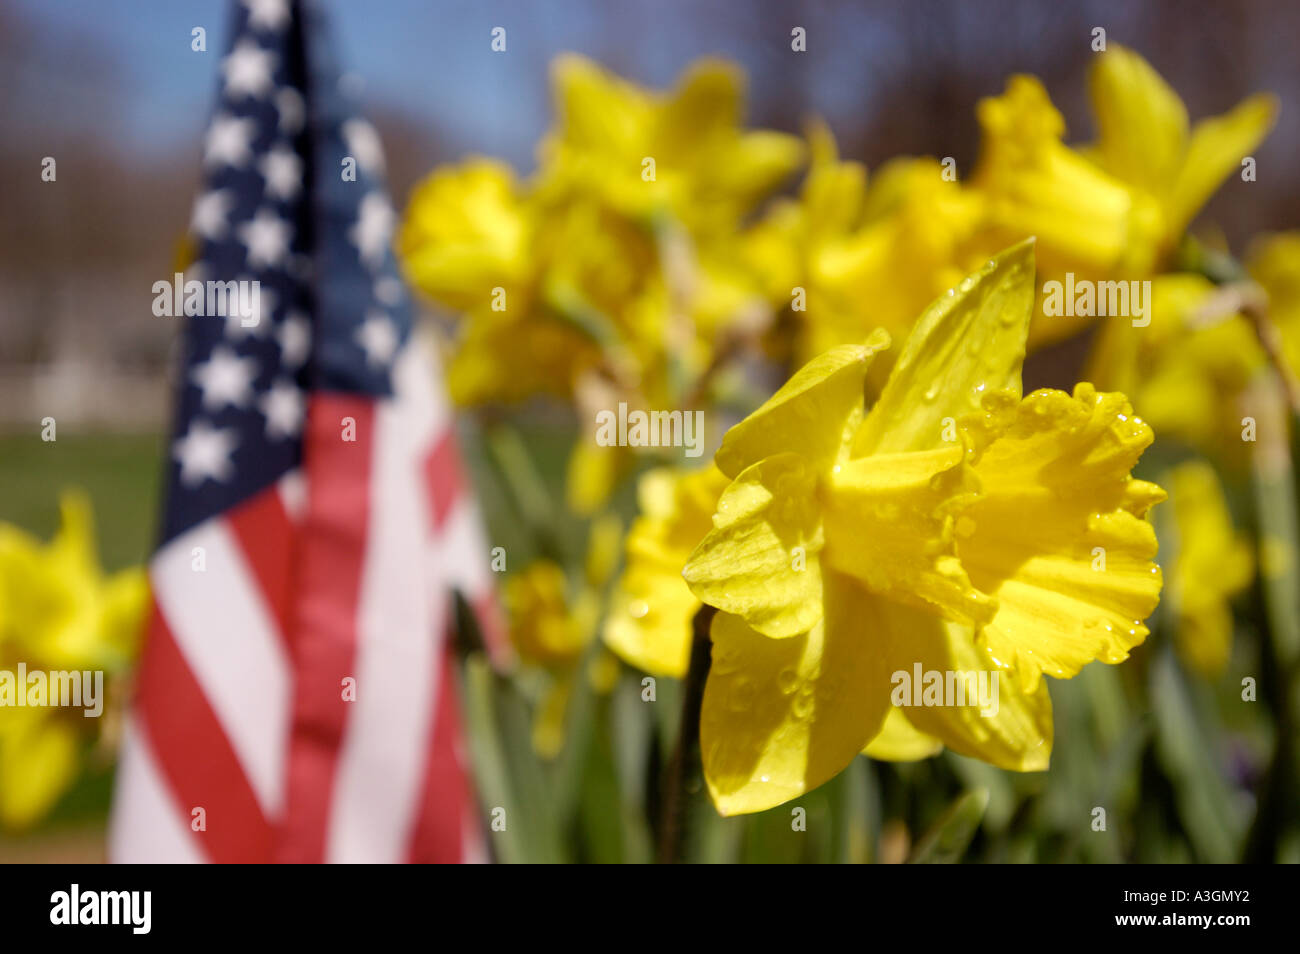 Daffodils next to a flag Stock Photo